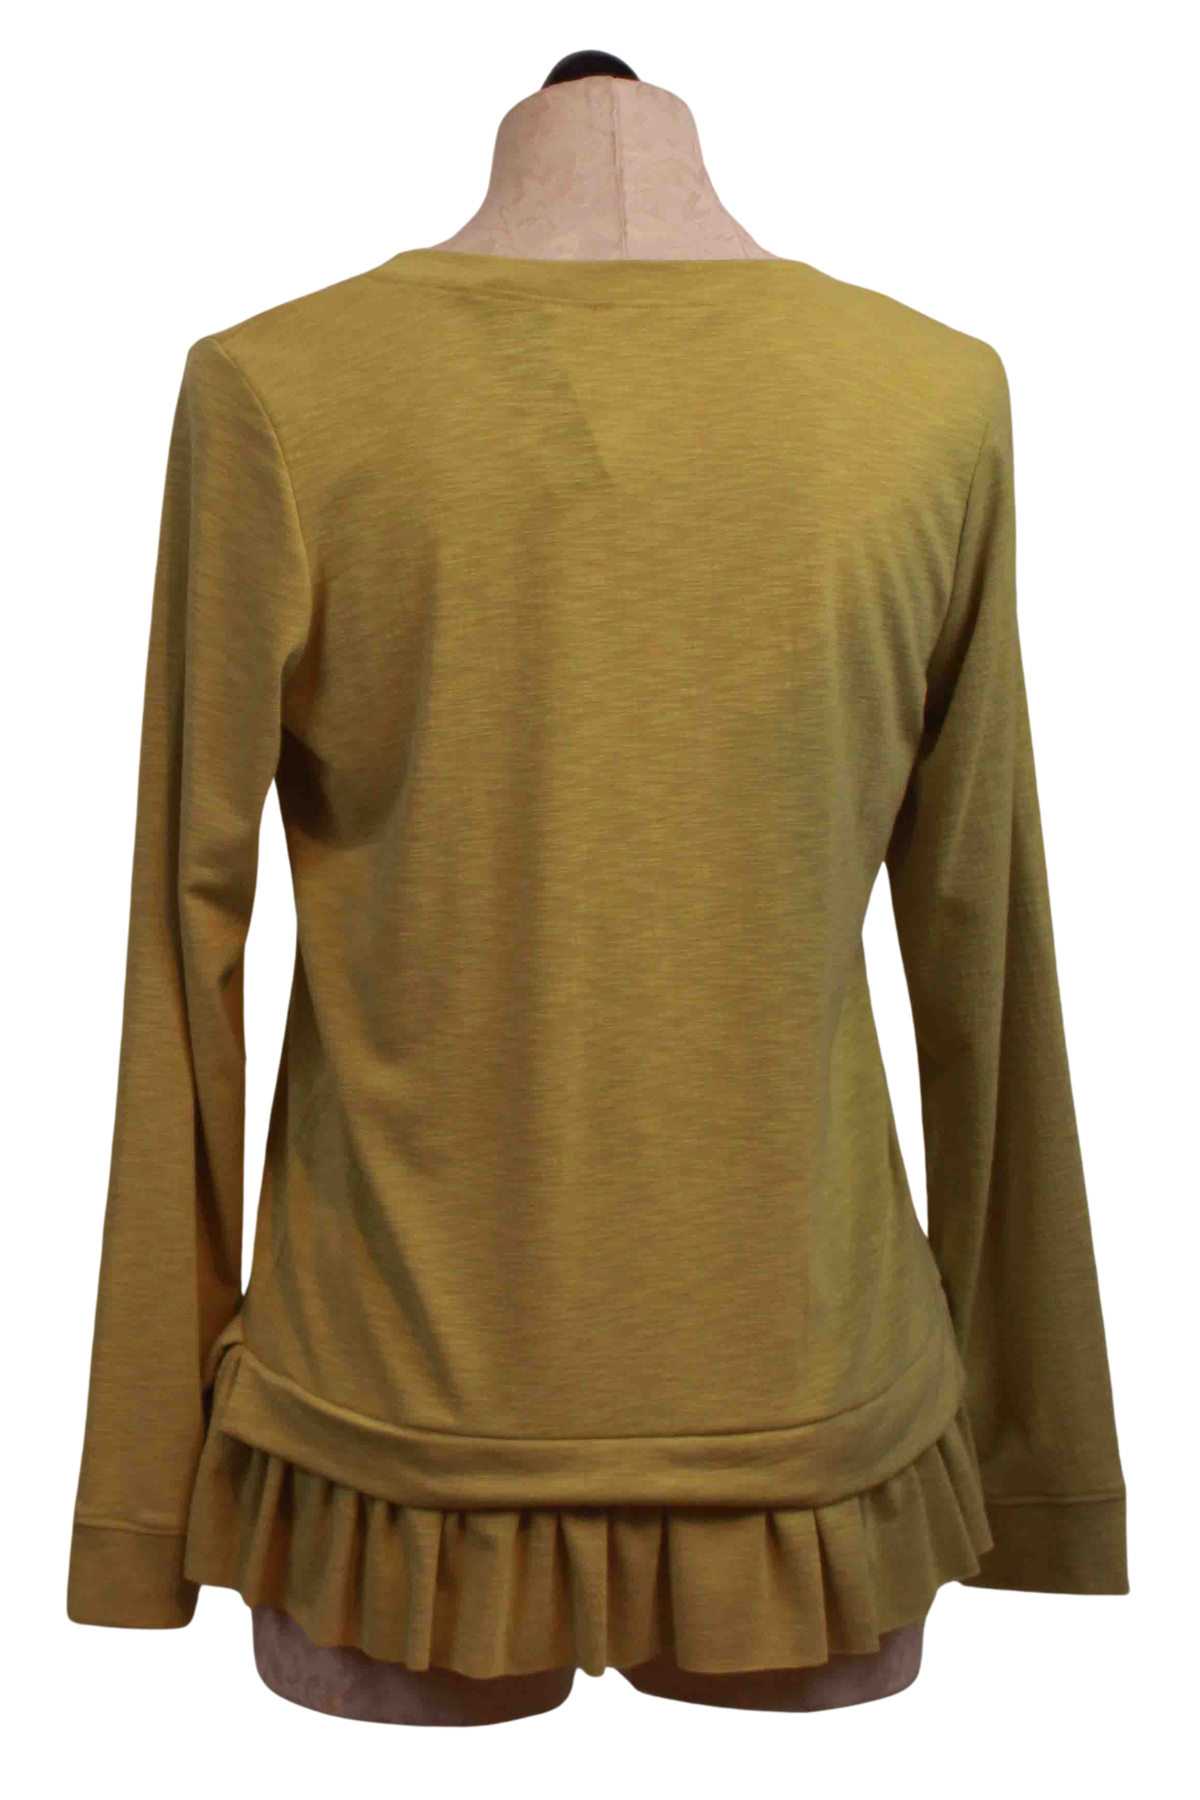 back view of Lime Long Sleeve Ruffle Bottom Top by Nally and Millie